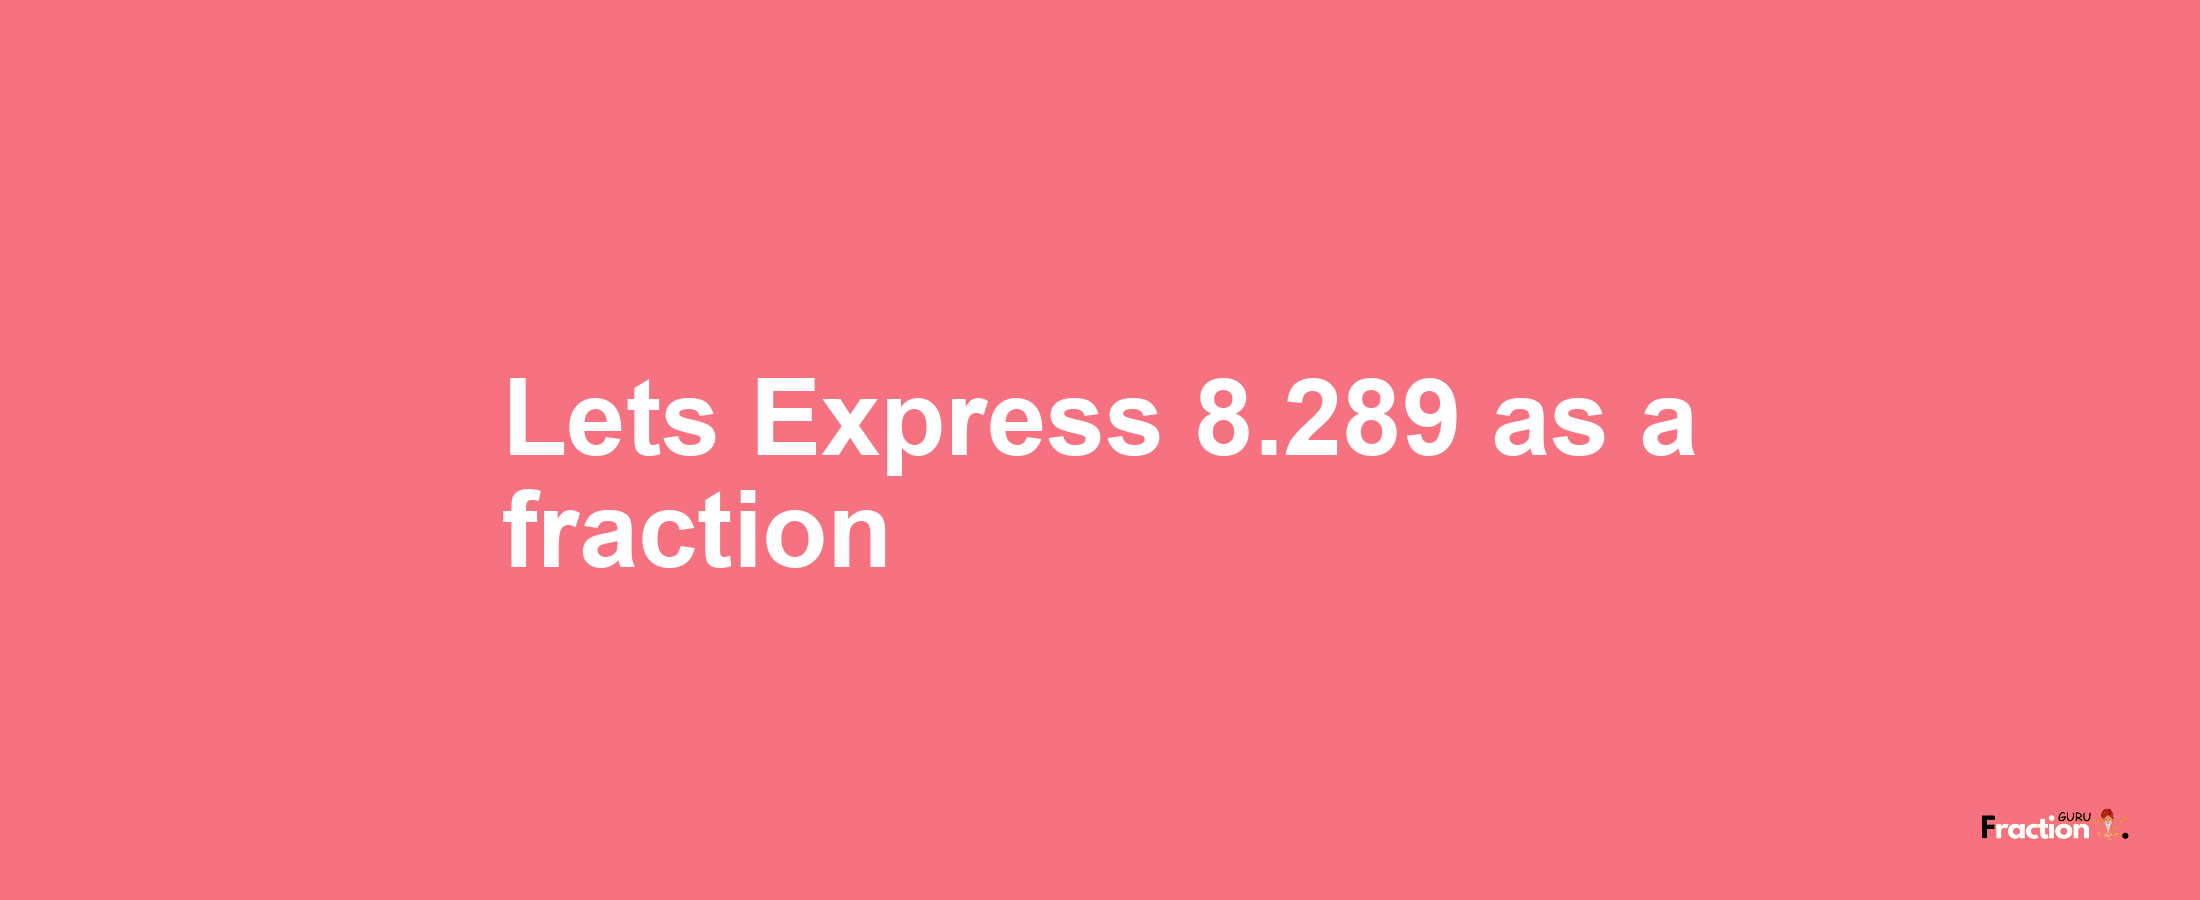 Lets Express 8.289 as afraction